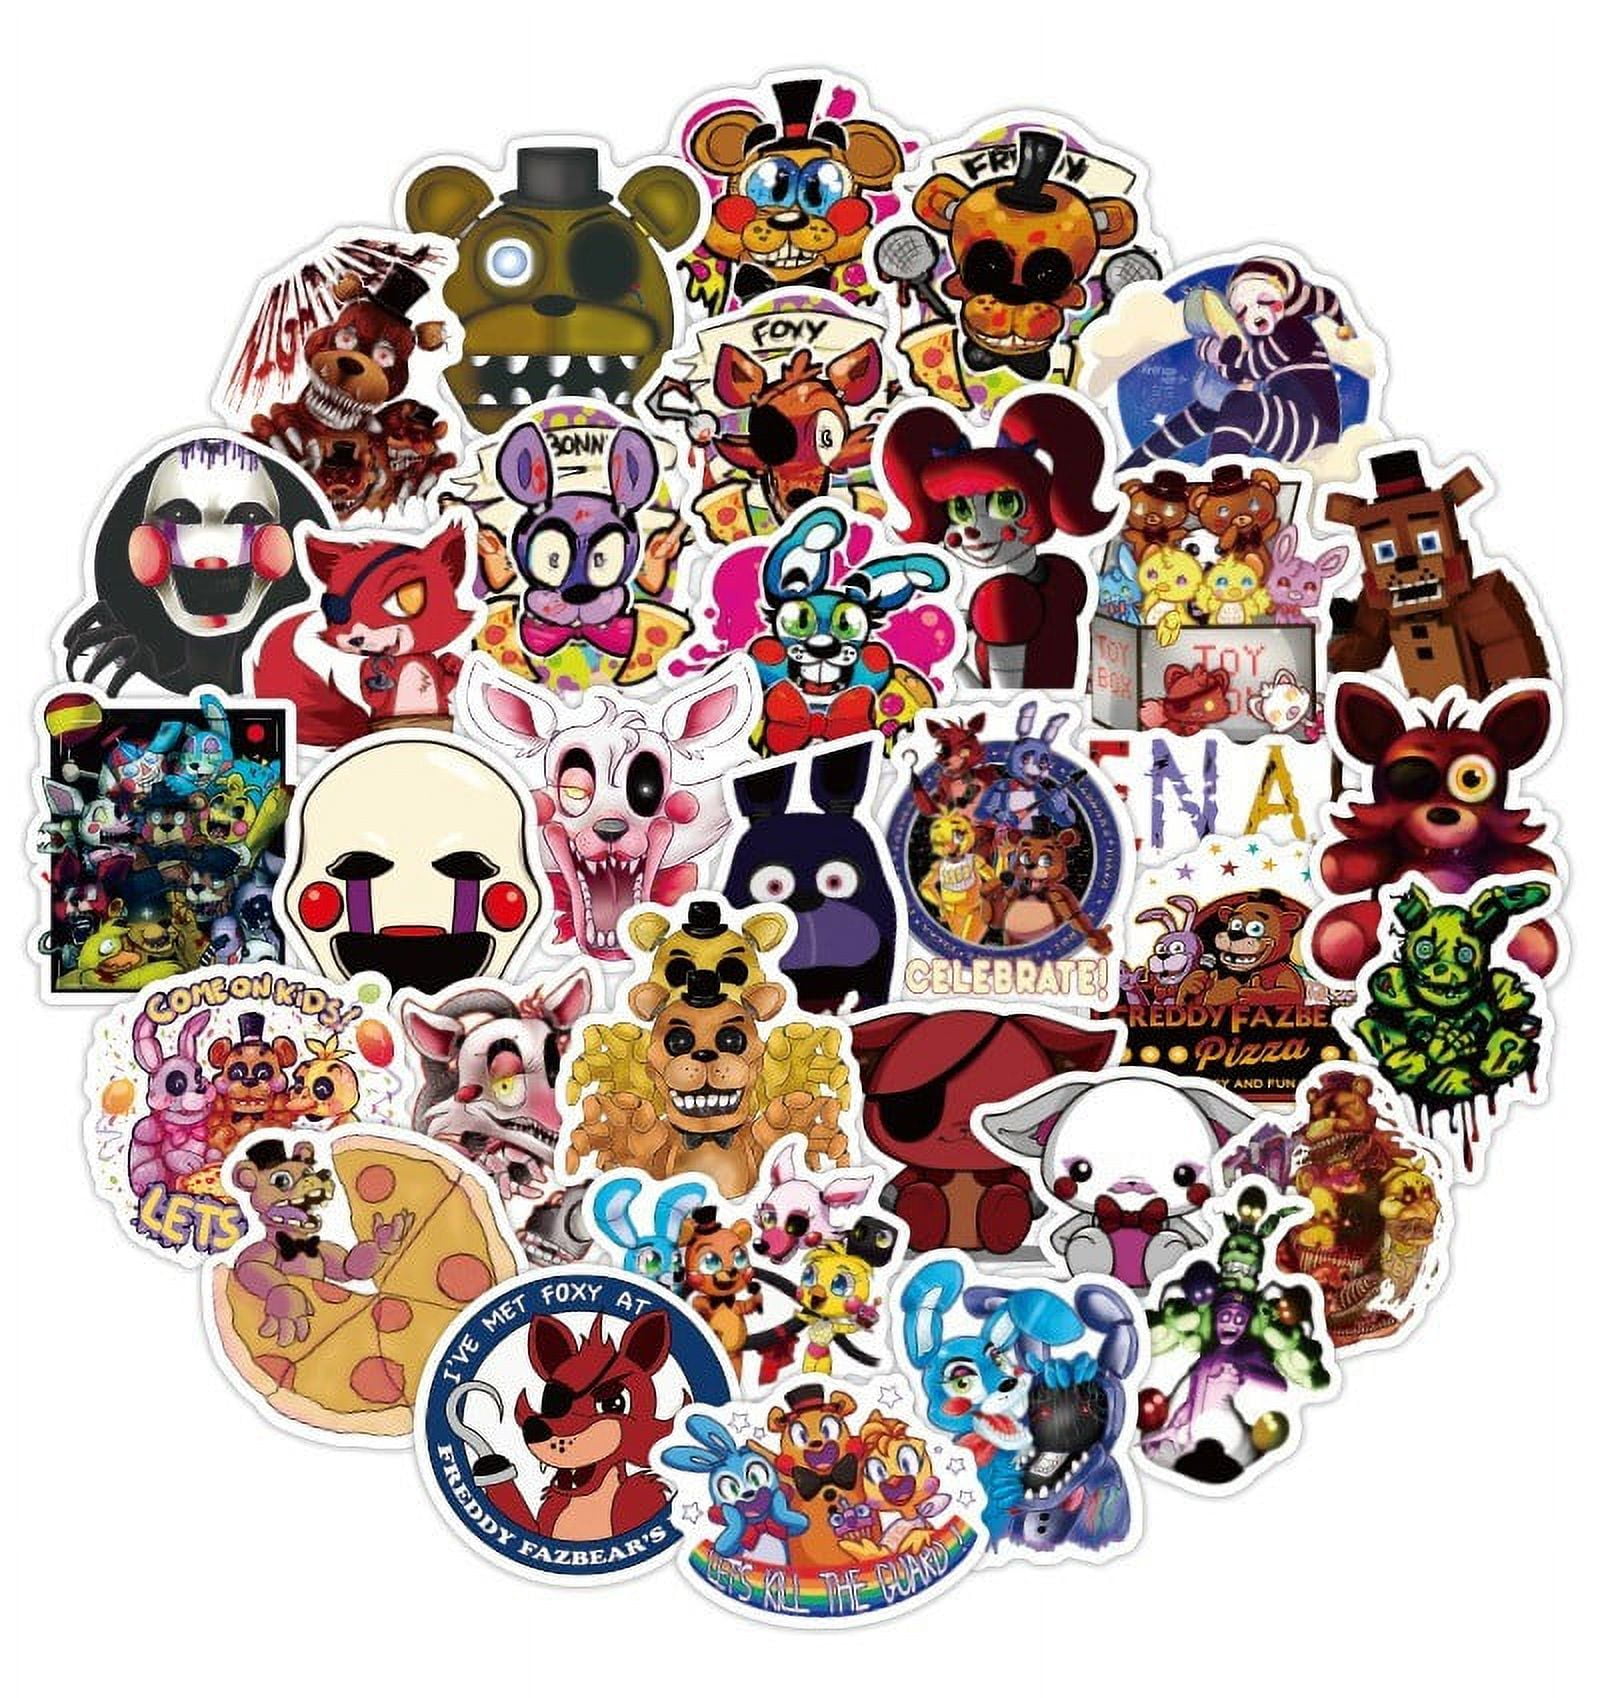 Personalized Happy Birthday Five Nights at Freddys Bonnie Chica Freddy  Fazbear Edible Cake Topper Image ABPID51009 